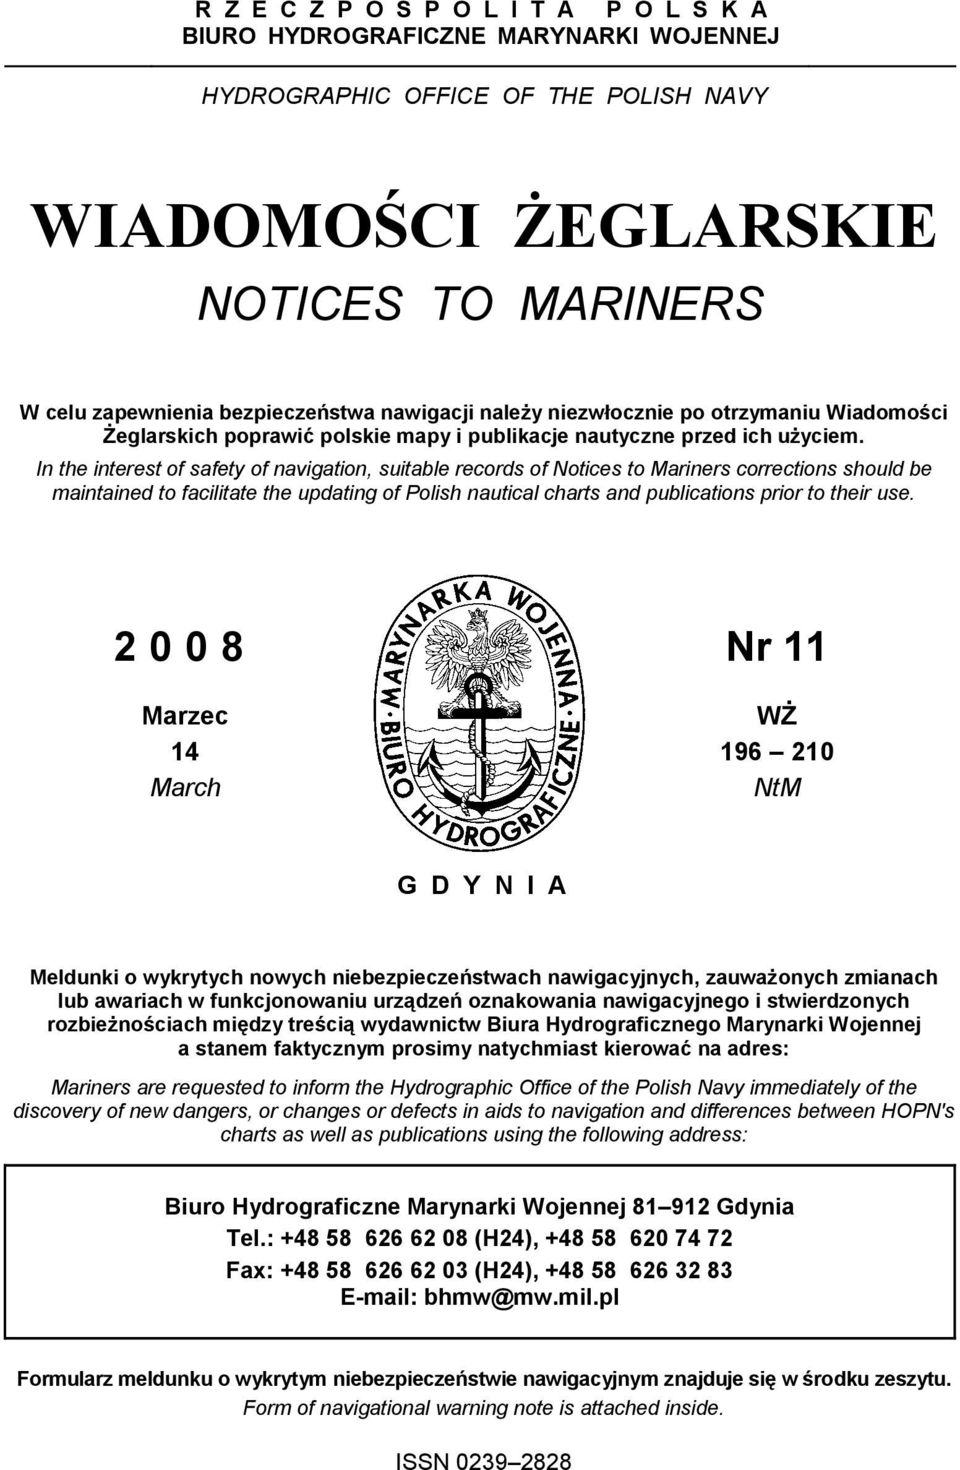 In the interest of safety of navigation, suitable records of Notices to Mariners corrections should be maintained to facilitate the updating of Polish nautical charts and publications prior to their